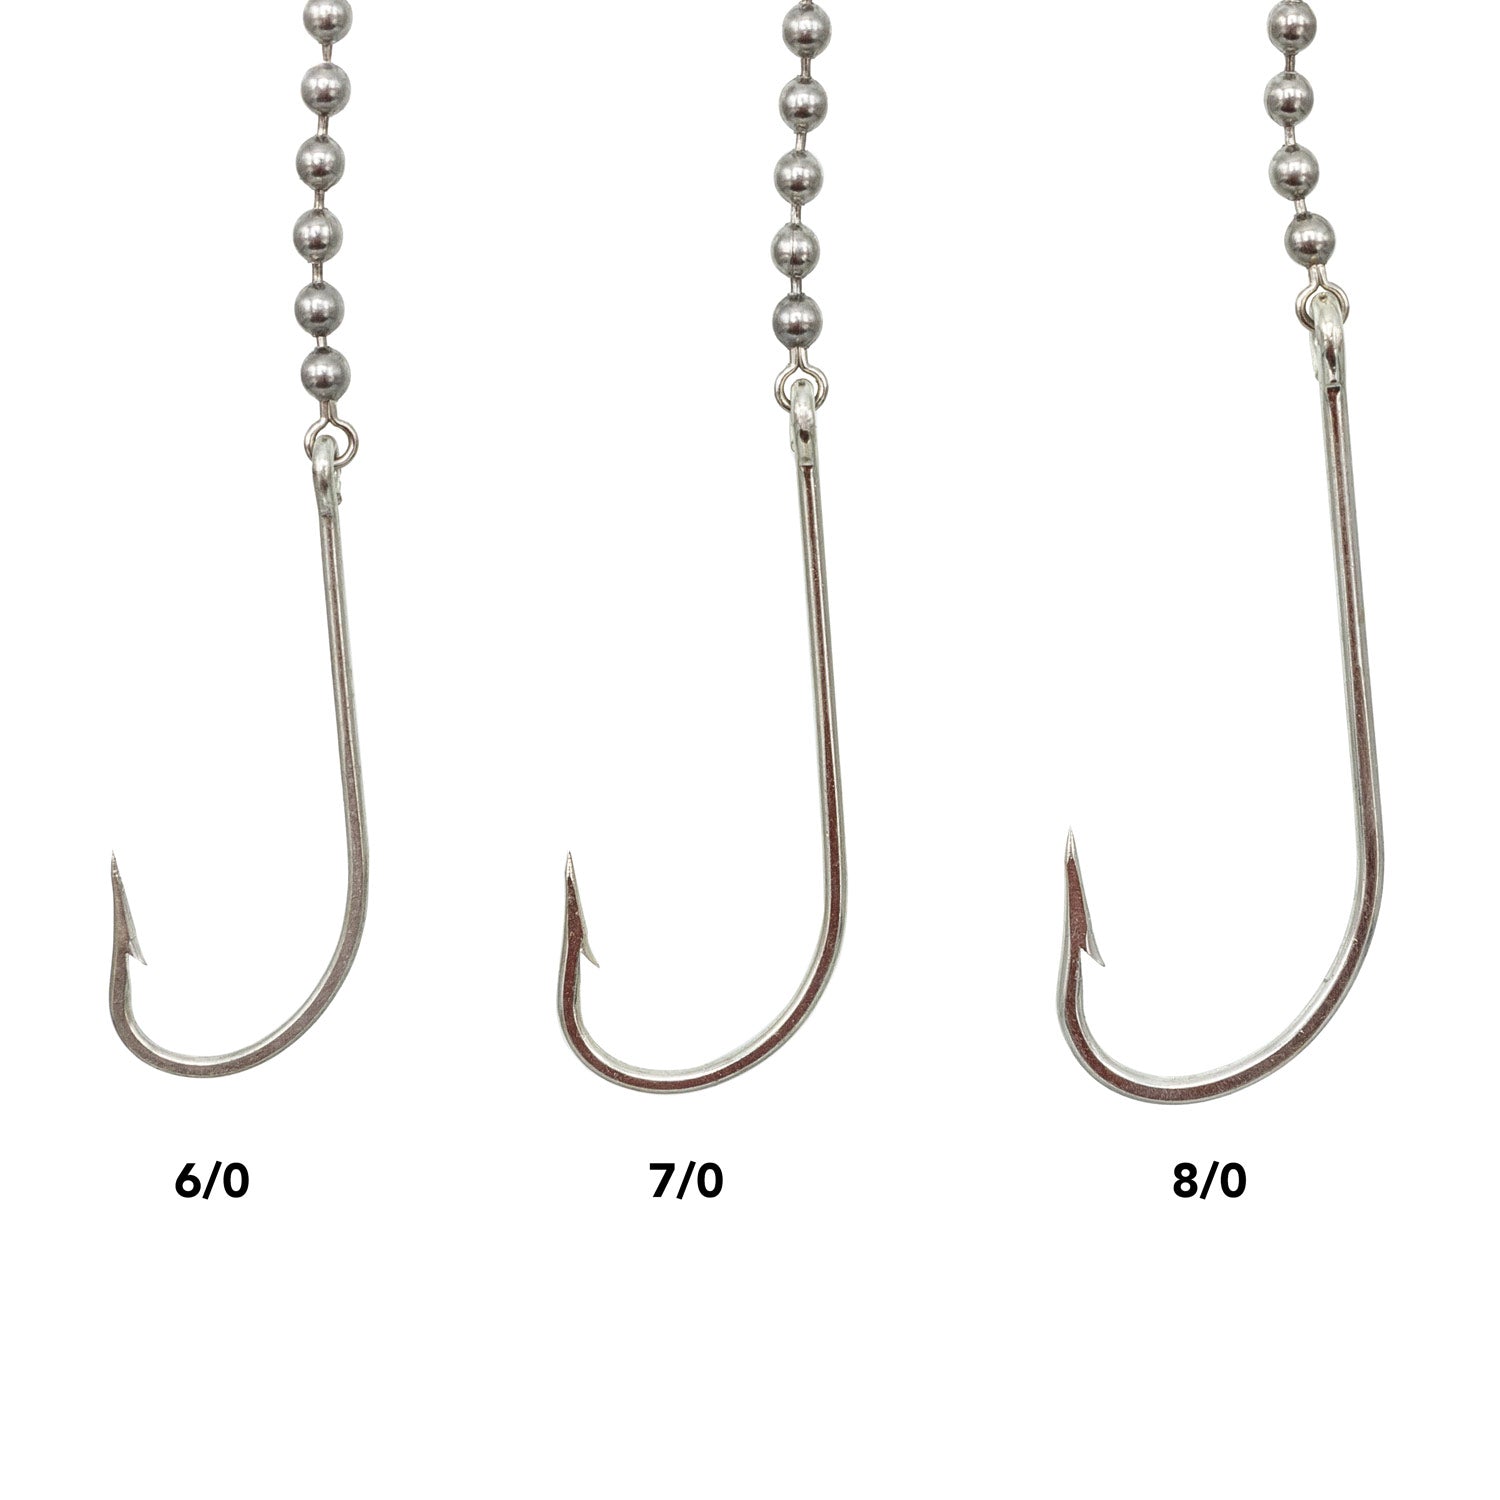 Fishing Bead Chain Sinkers for sale